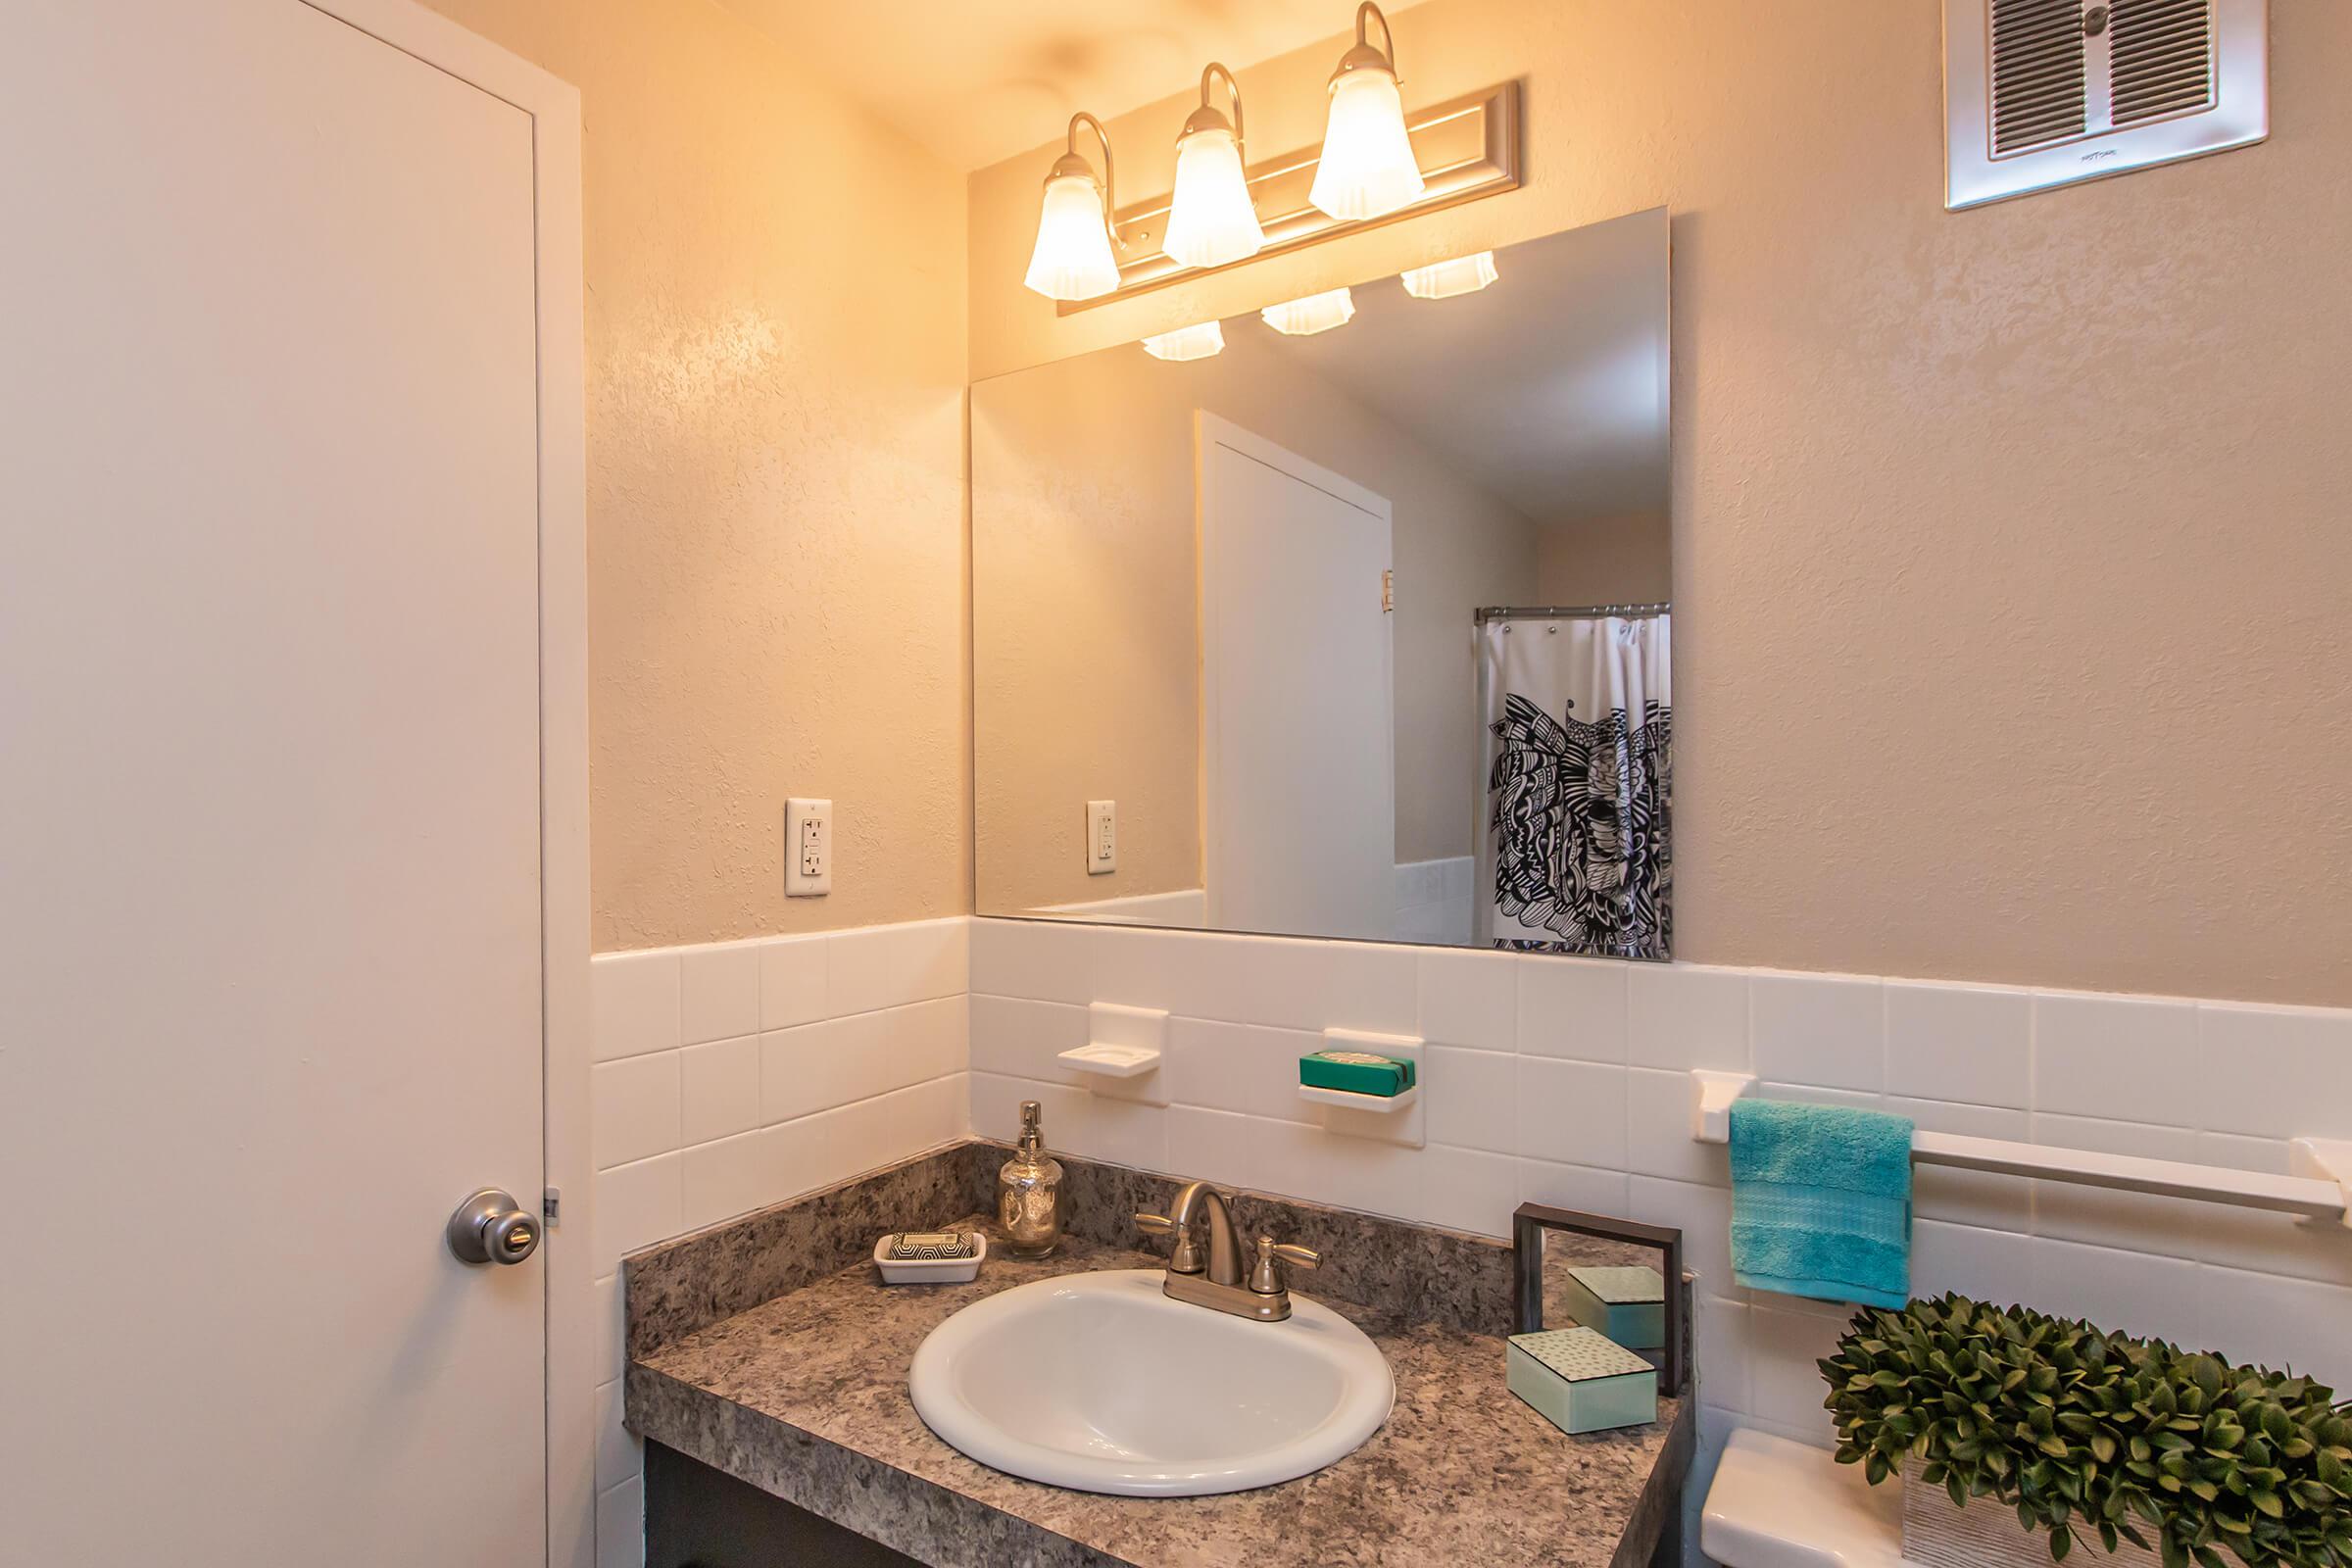 MODERN BATHROOM AT STUDIO APARTMENT HOMES IN KNOXVILLE, TN